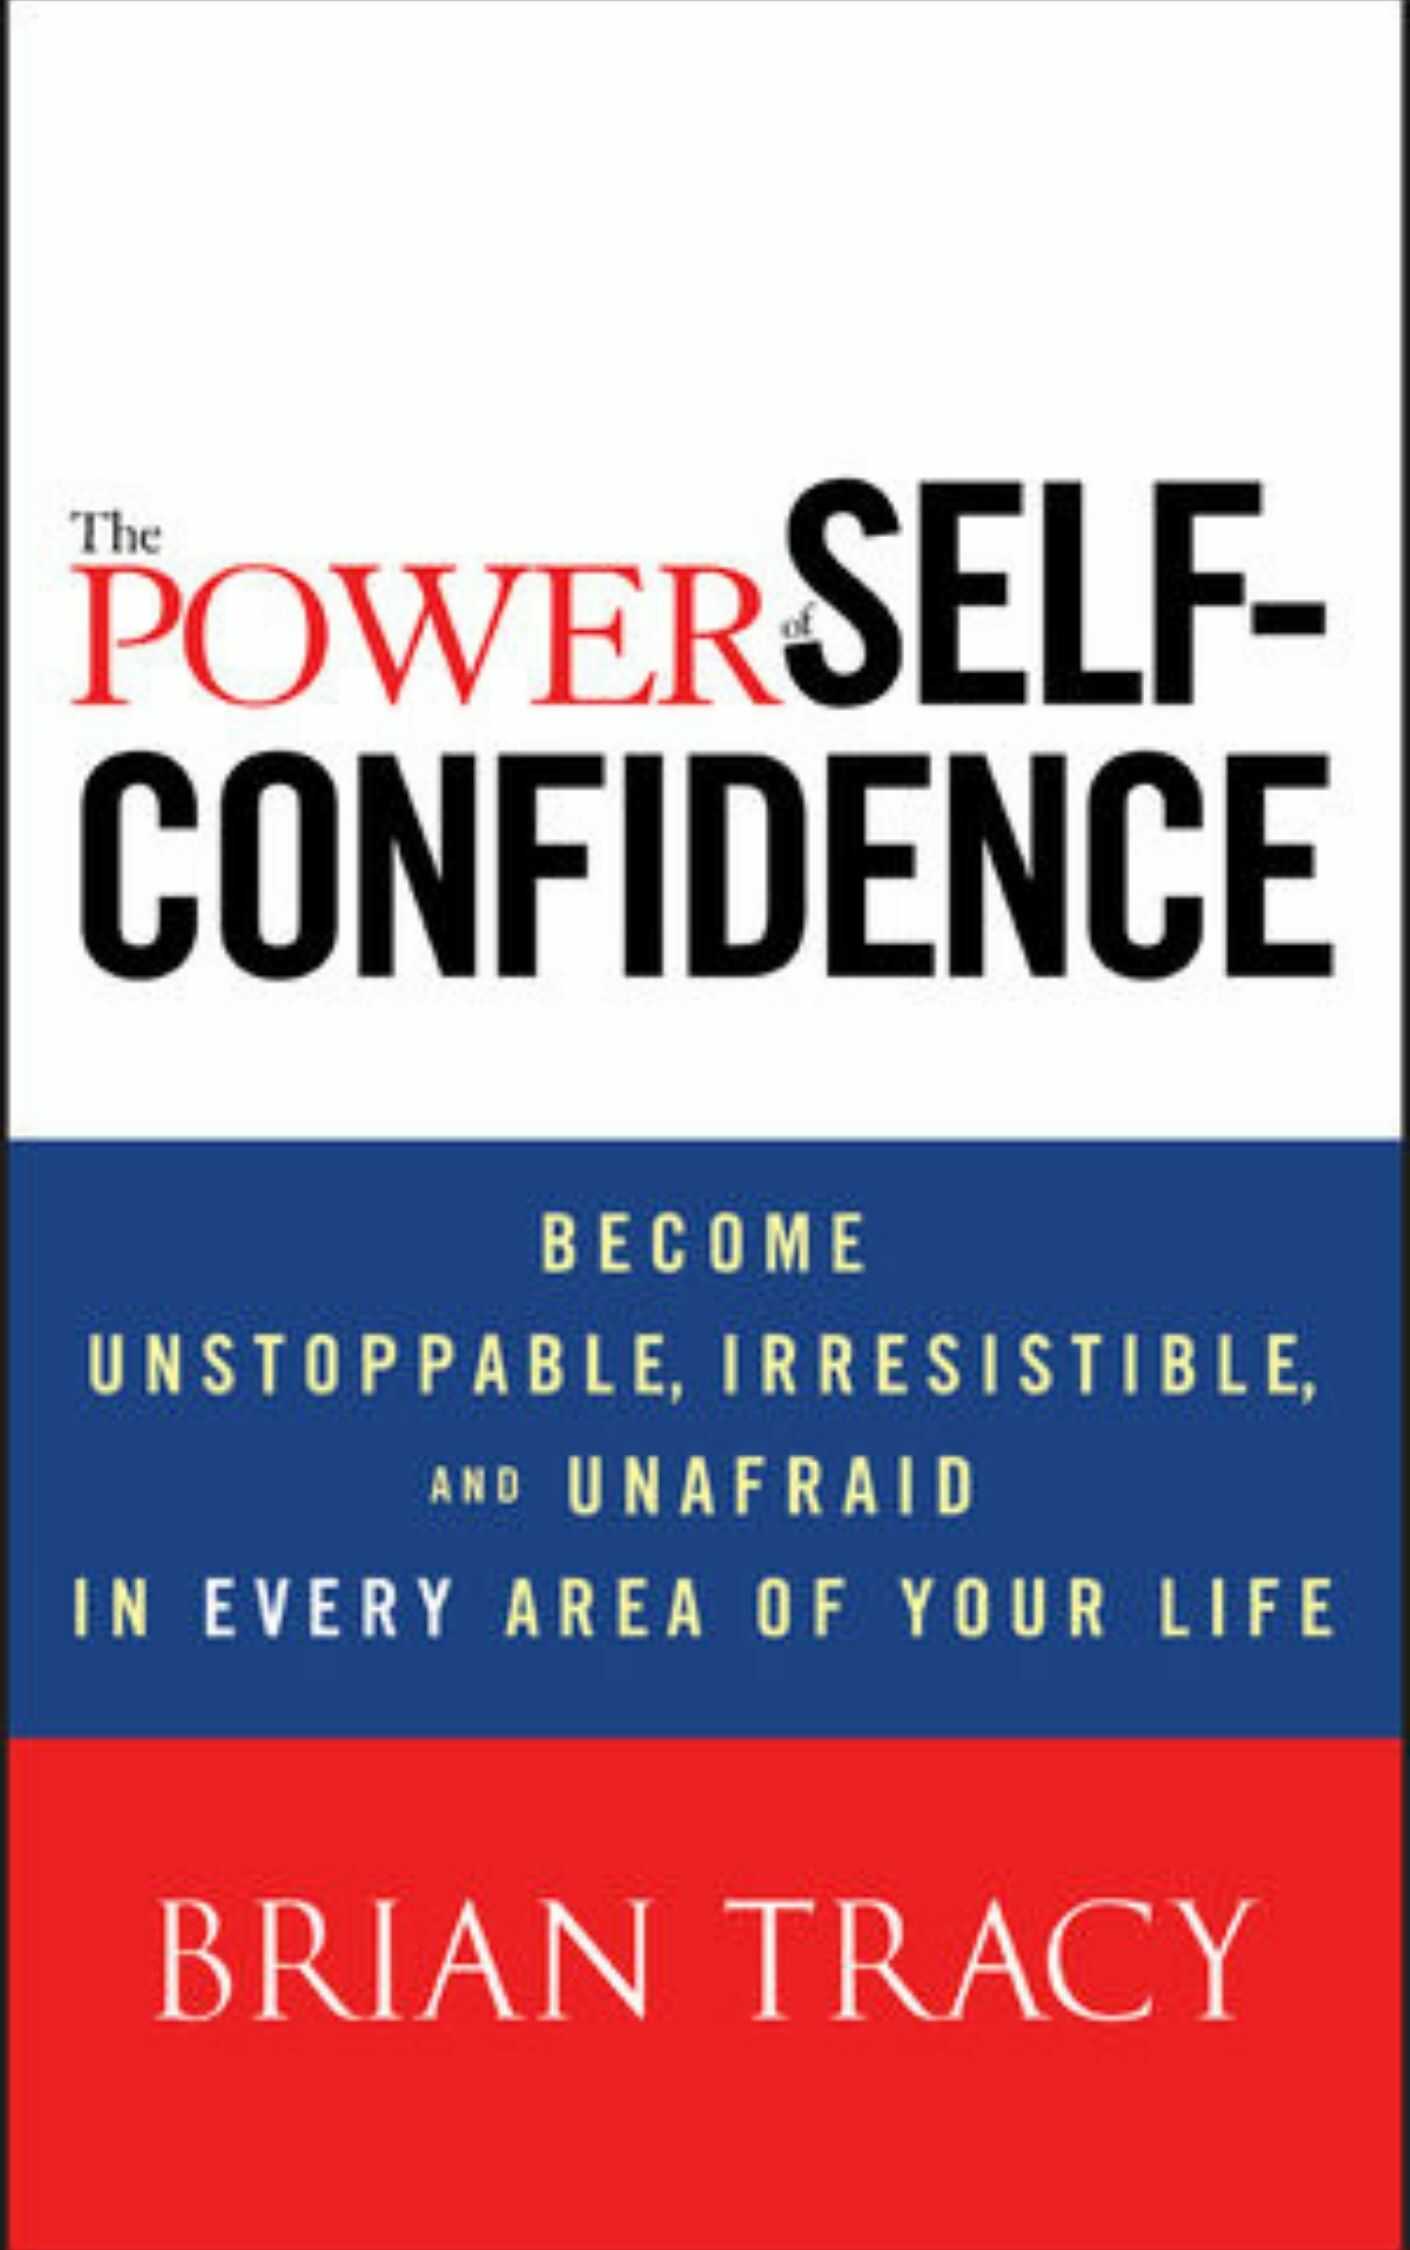 best selling confidence books